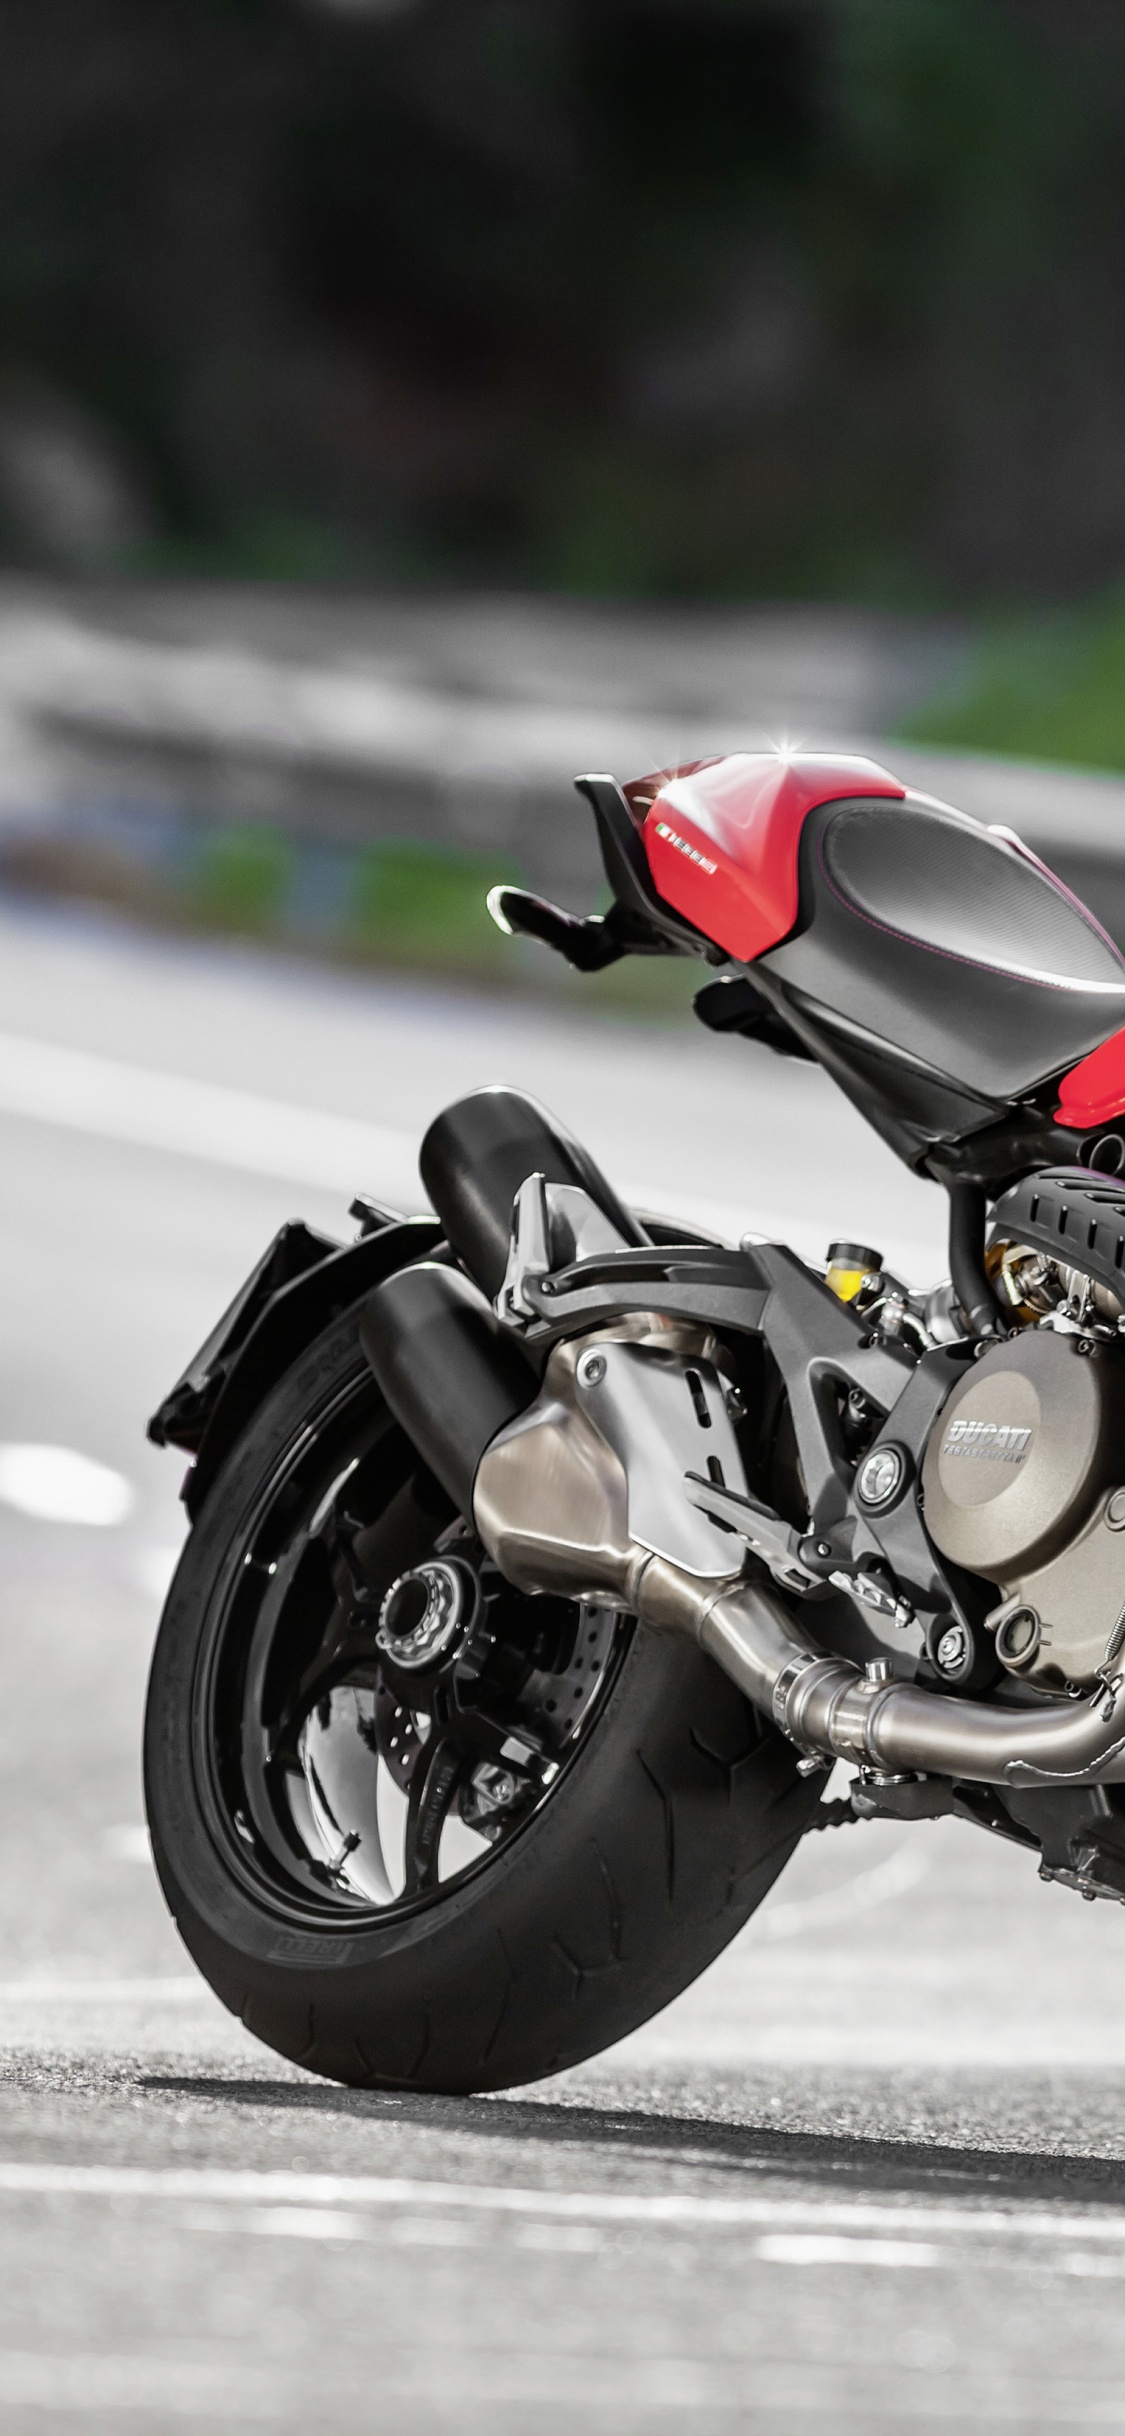 Red and Black Sports Bike on Road During Daytime. Wallpaper in 1125x2436 Resolution